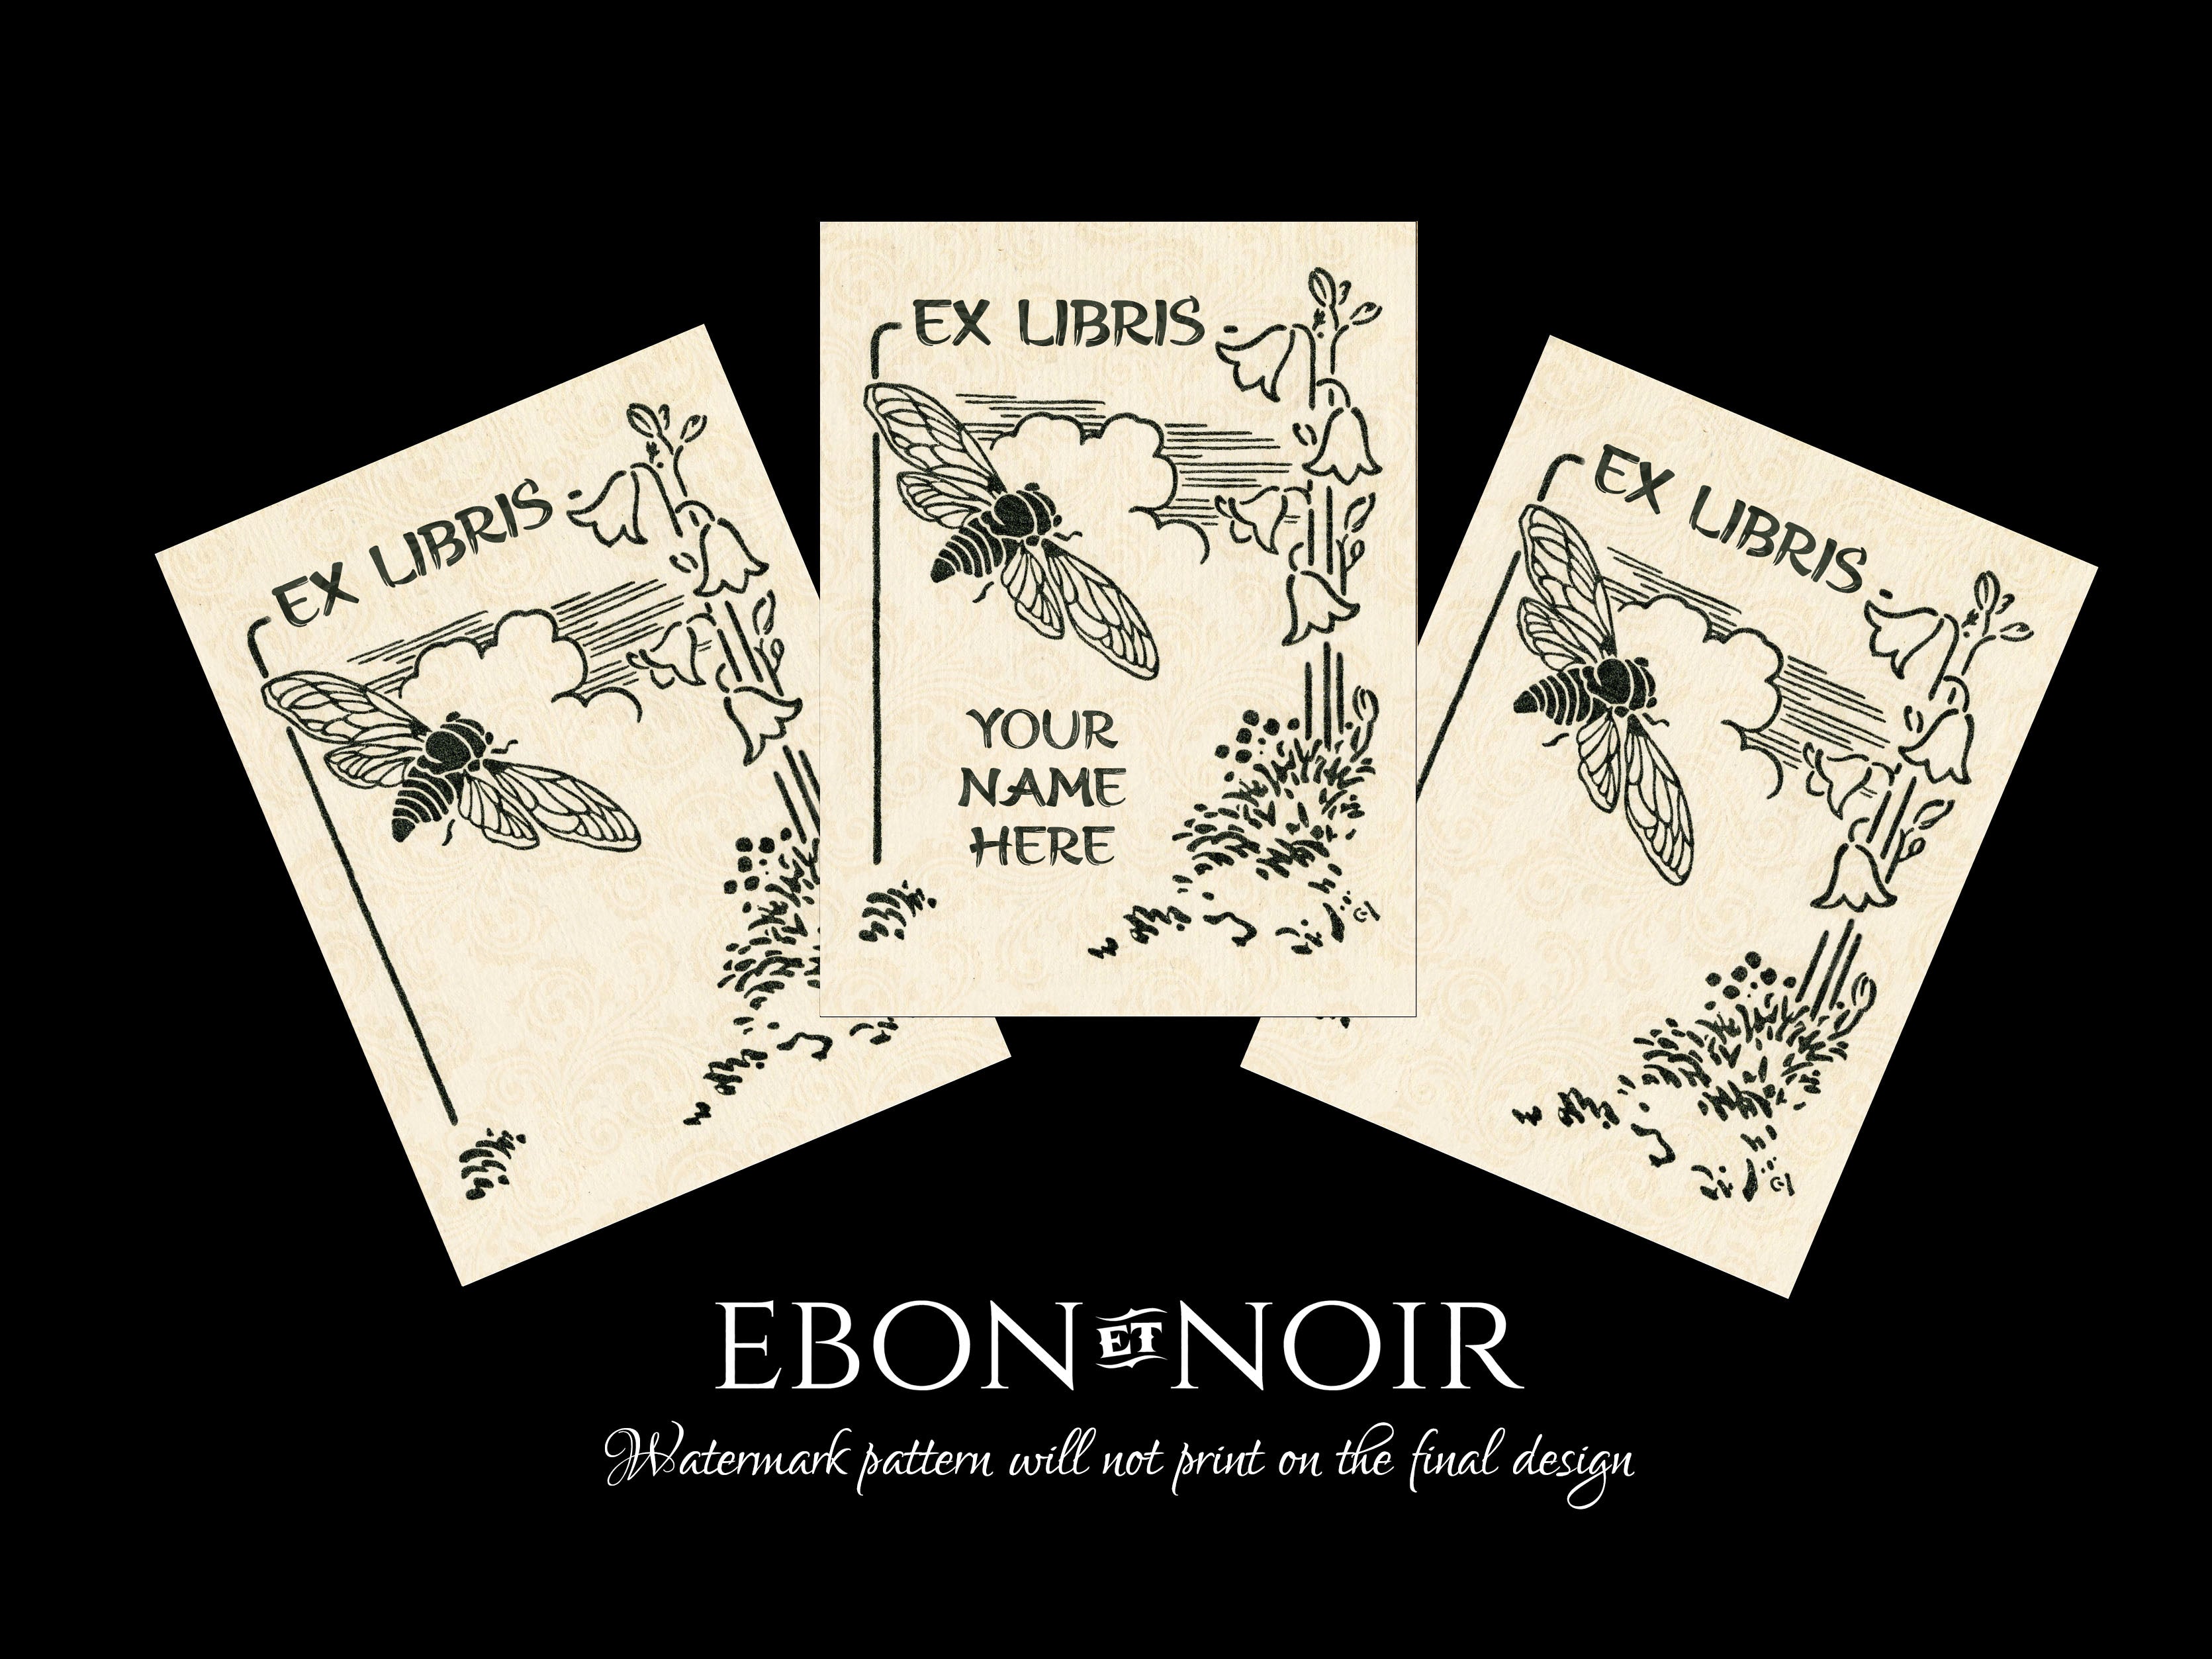 Honeybee, Personalized Ex-Libris Bookplates, Crafted on Traditional Gummed Paper, 3in x 4in, Set of 30